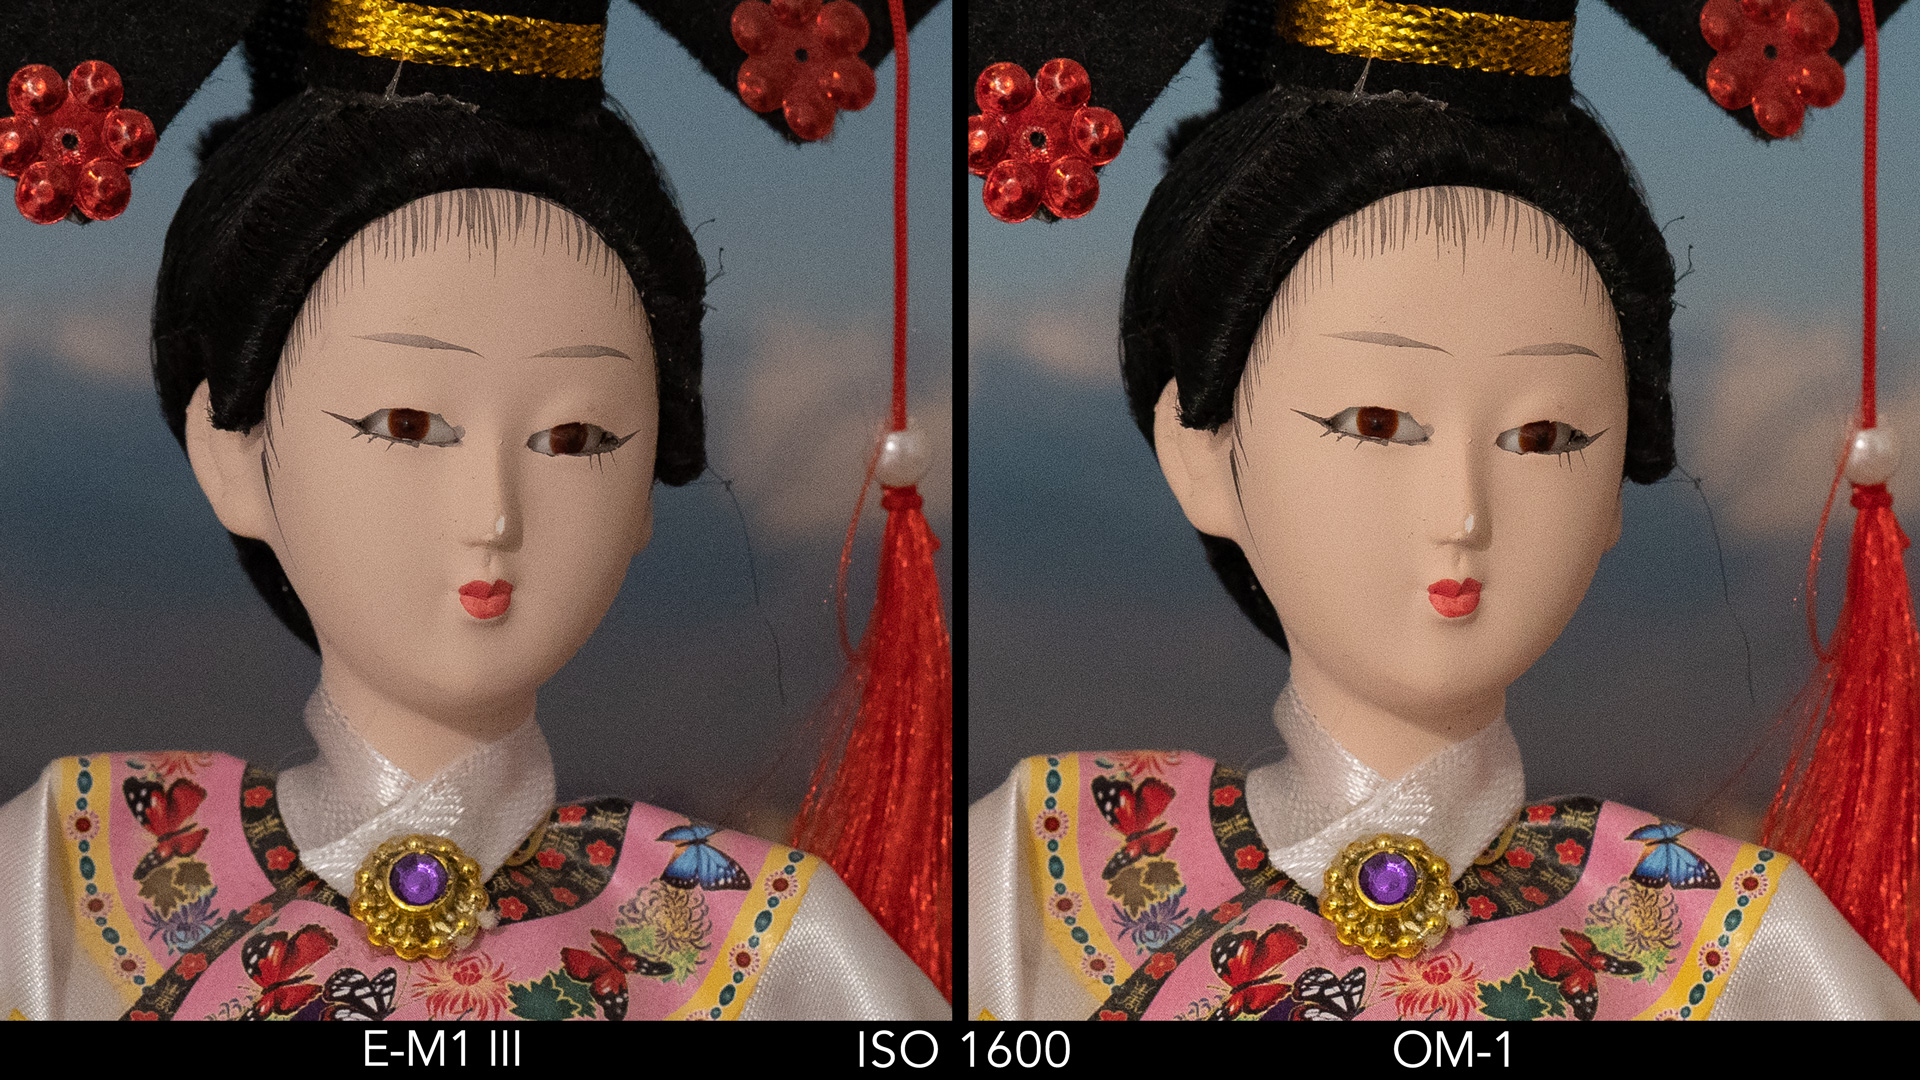 side by side image of a Japanese doll comparing ISO 1600 for the E-M1 III and OM-1